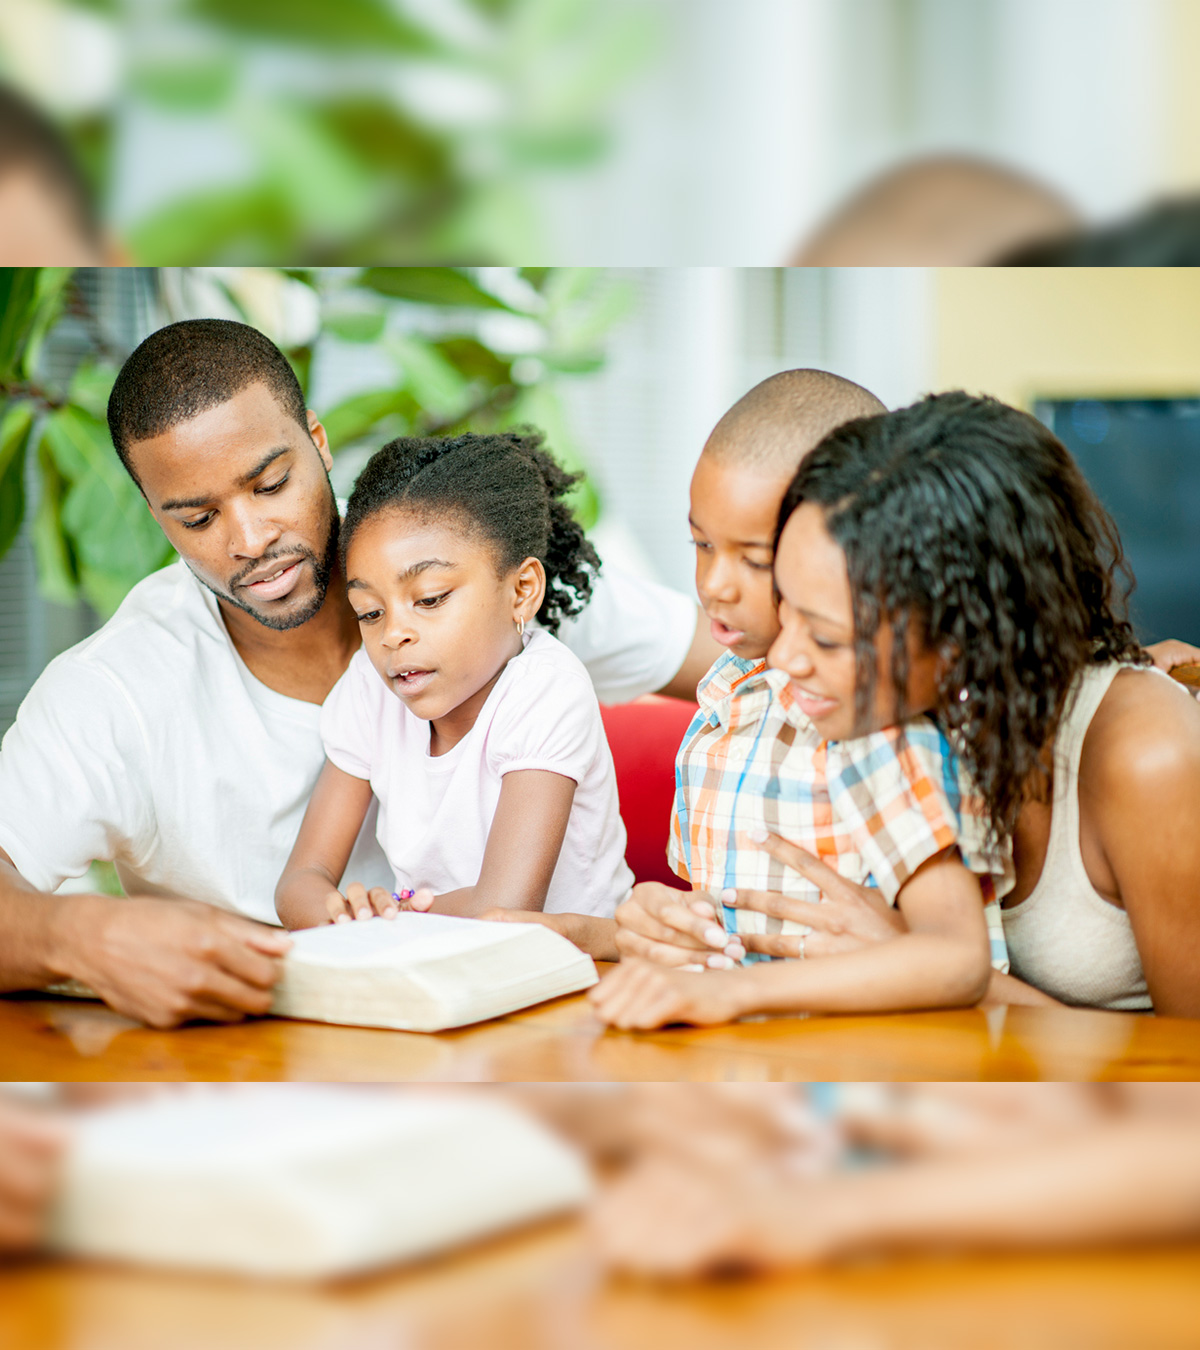 75 Inspirational And Pious Bible Verses About Family Unity